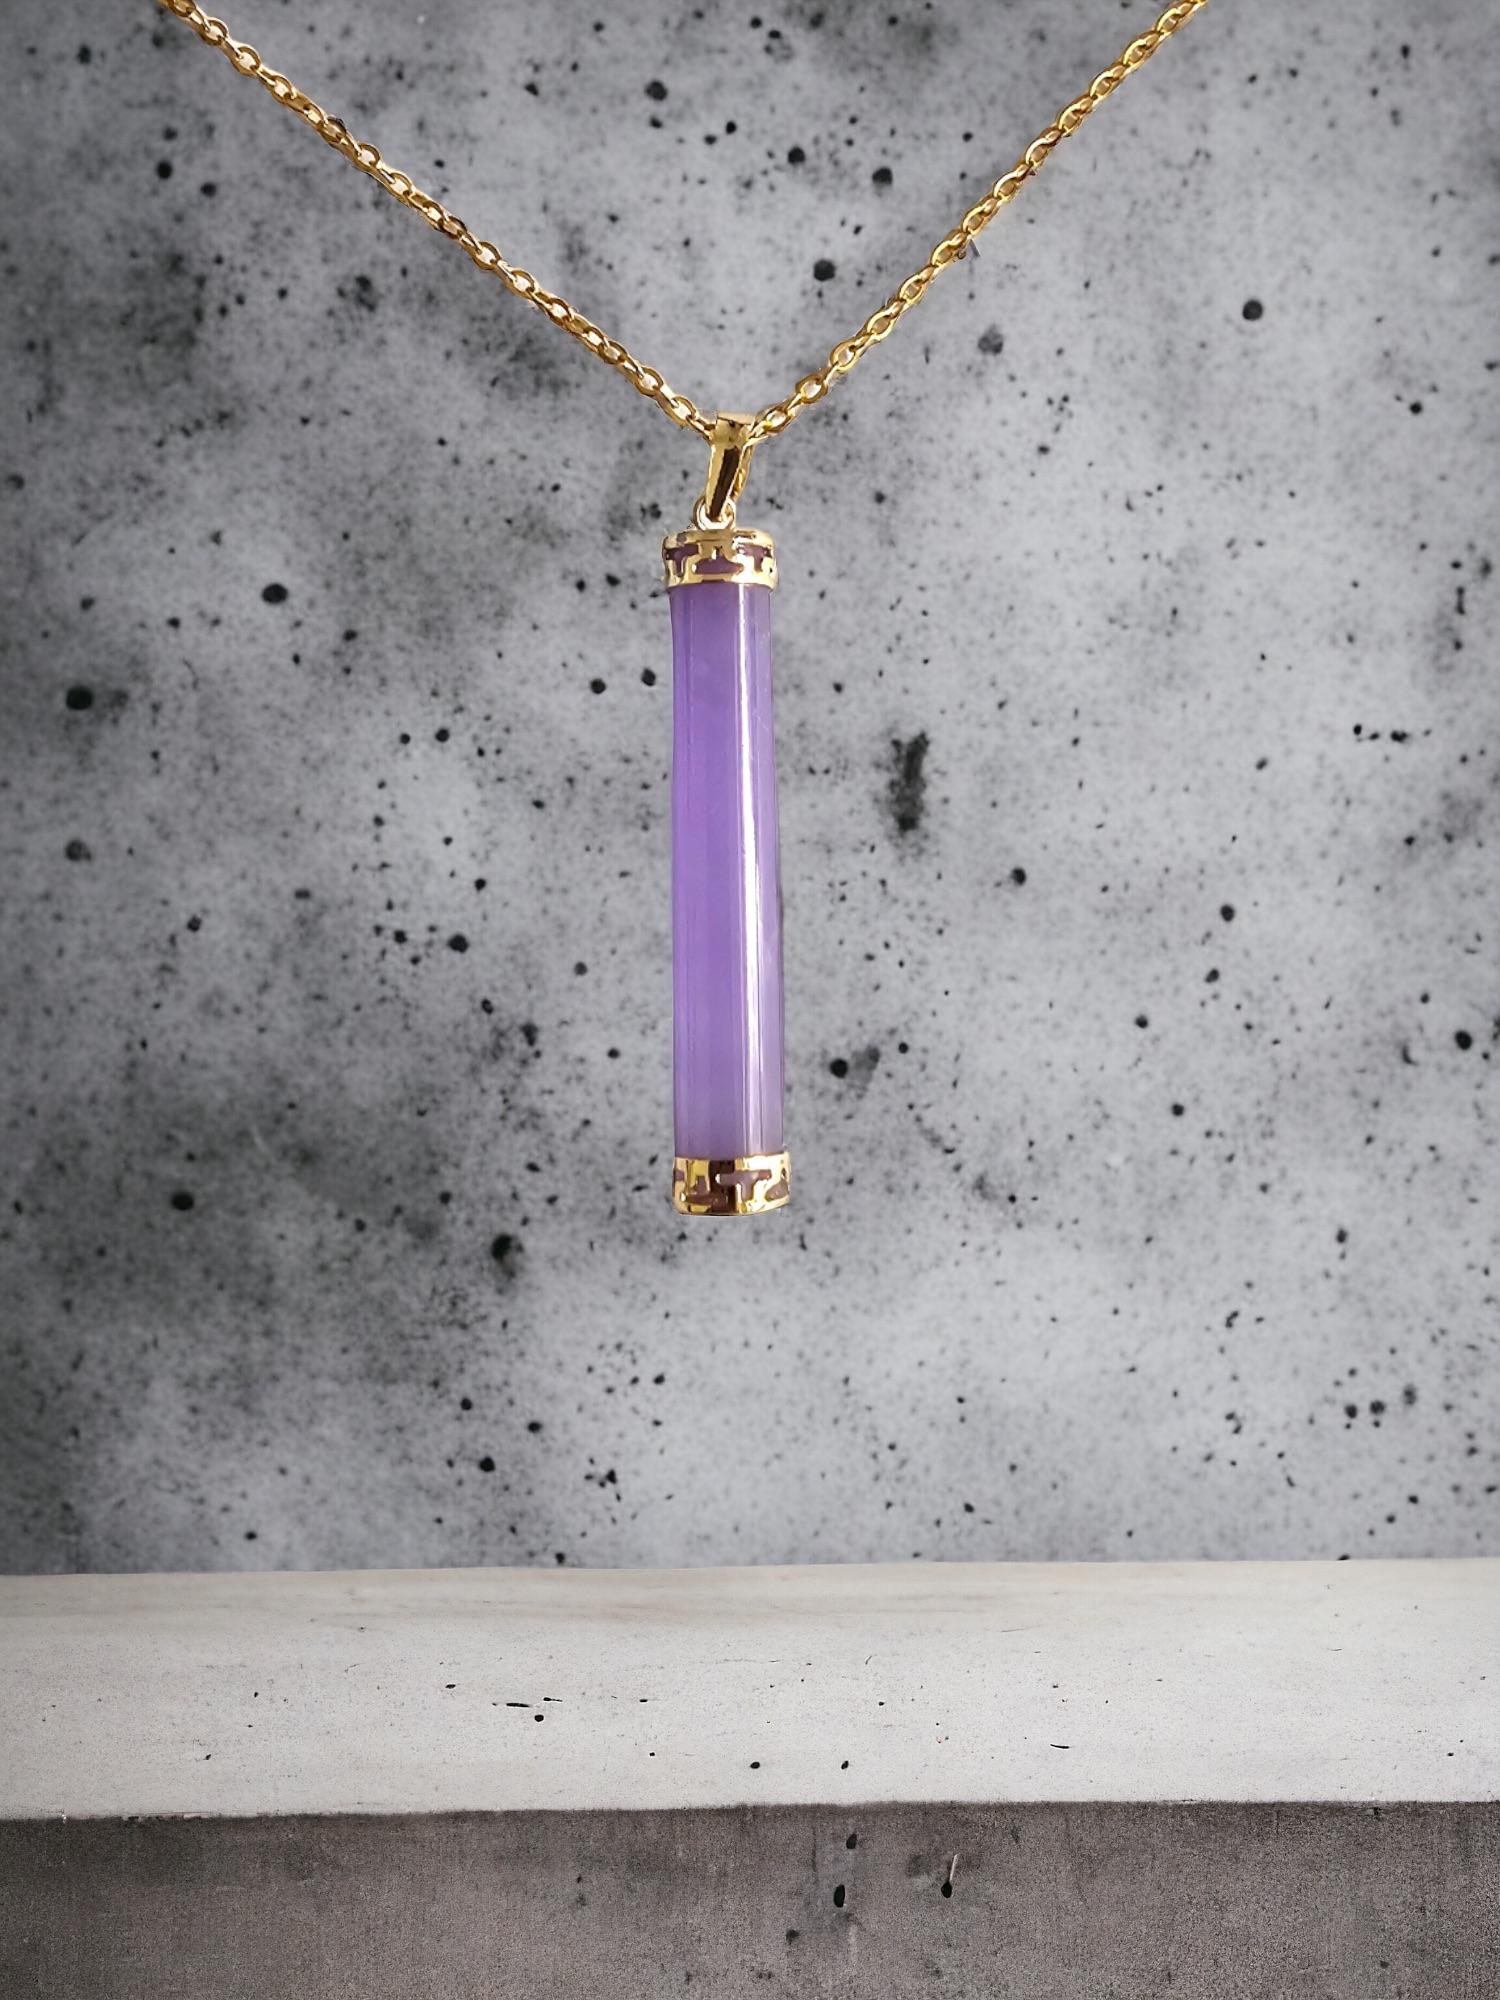 Round Pillar Purple Lavender Jade Jadeite Tube Pendant (With Solid 14K Yellow Gold)

The cylindric smoothness represents strength and awareness of nature, the 'Round Pillar Purple Jade Tube Pendant' is a classic and distinct creation that allows the